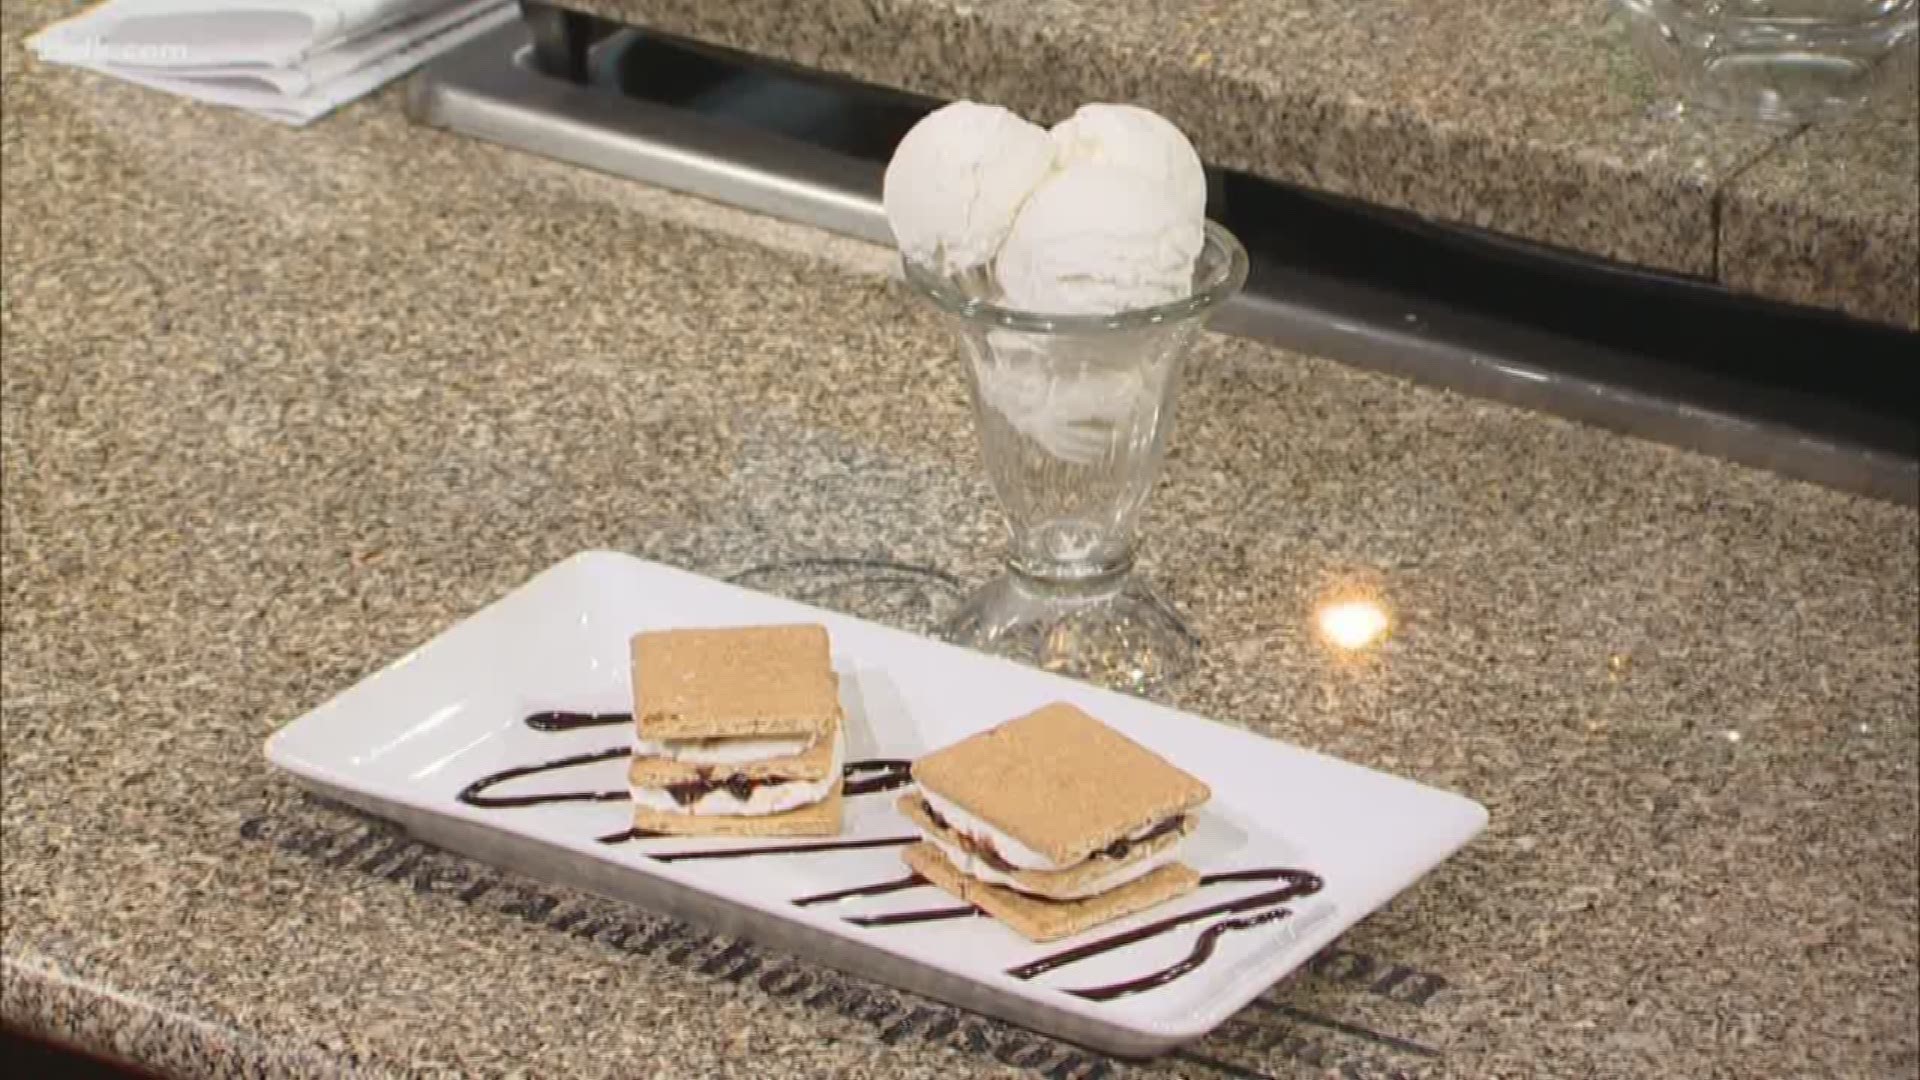 This ice cream sandwich by St. Louis District Dairy Council is fun and easy to make with kids of all ages and a great summertime treat to cool you down!